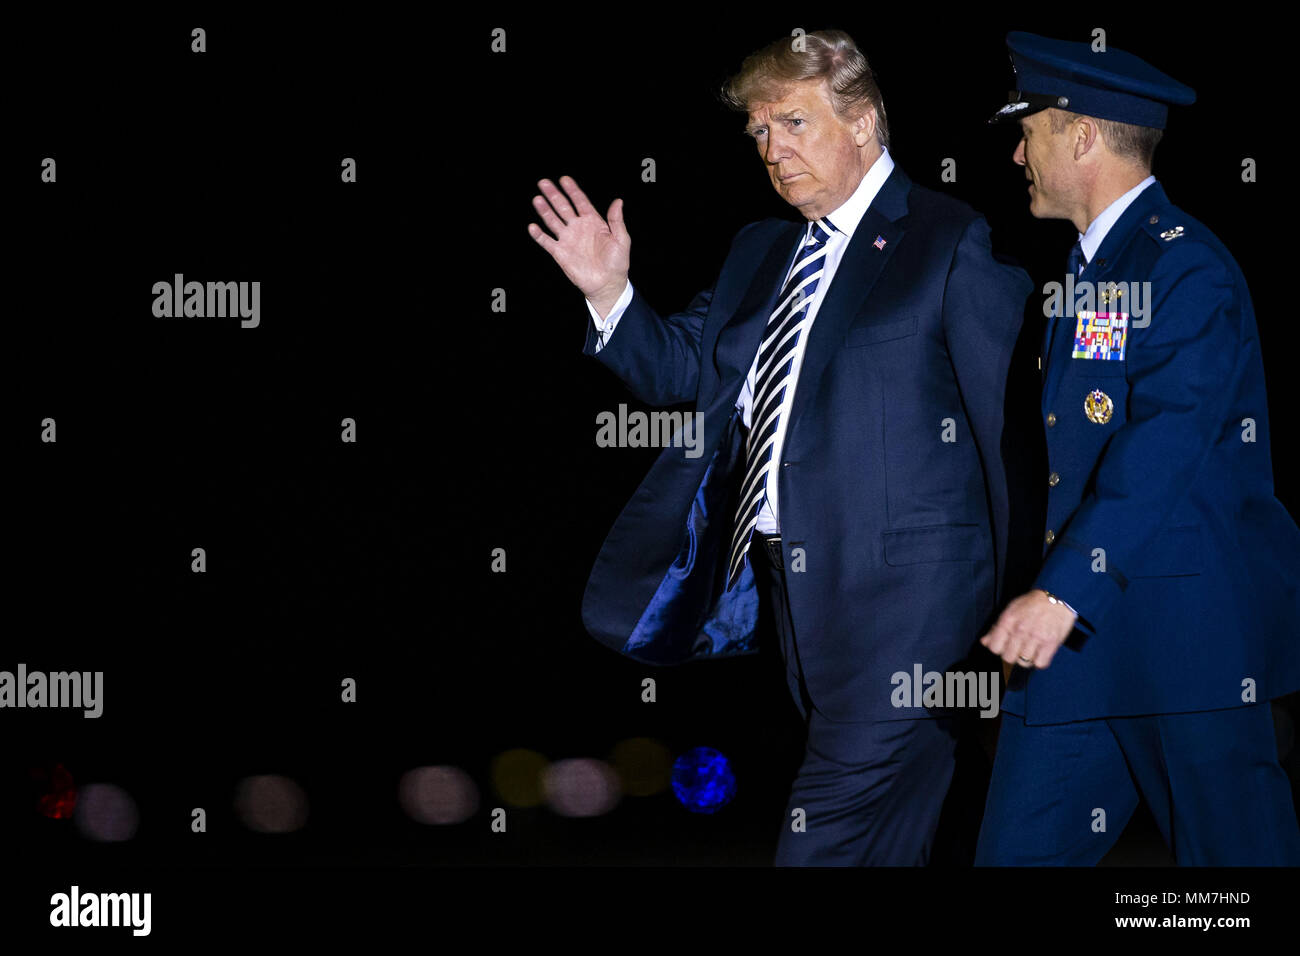 May 10, 2018 - Washington, District of Columbia, United States of America - U.S. President Donald Trump walks with Air Force Col. Casey Eaton, Commander, 89th Airlift Wing, before greeting American detainees before their arrival from North Korea at Joint Base Andrews, Maryland, U.S., on Thursday, May 10, 2018. North Korea released the three U.S. citizens who had been detained for as long as two years, a goodwill gesture ahead of a planned summit between President Donald Trump and Kim Jong Un that's expected in the coming weeks. Credit: Al Drago/Pool via CNP (Credit Image: © Al Drago/CNP via Stock Photo